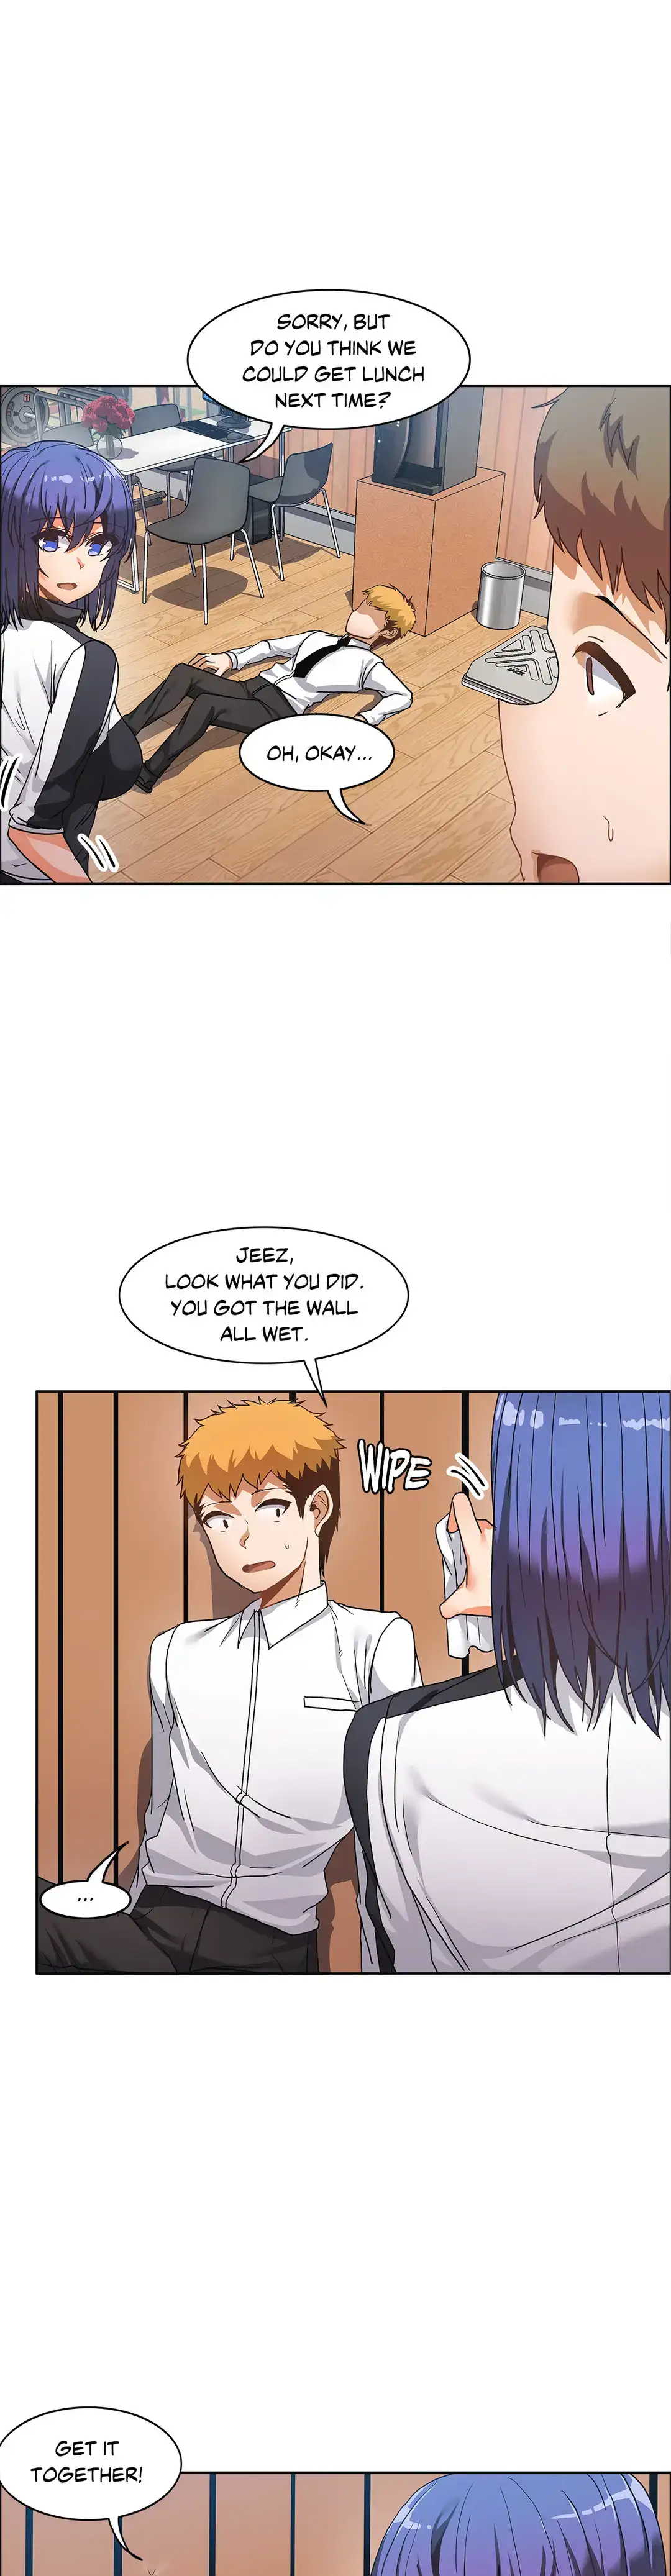 The Girl That Wet the Wall - Chapter 53 Page 27